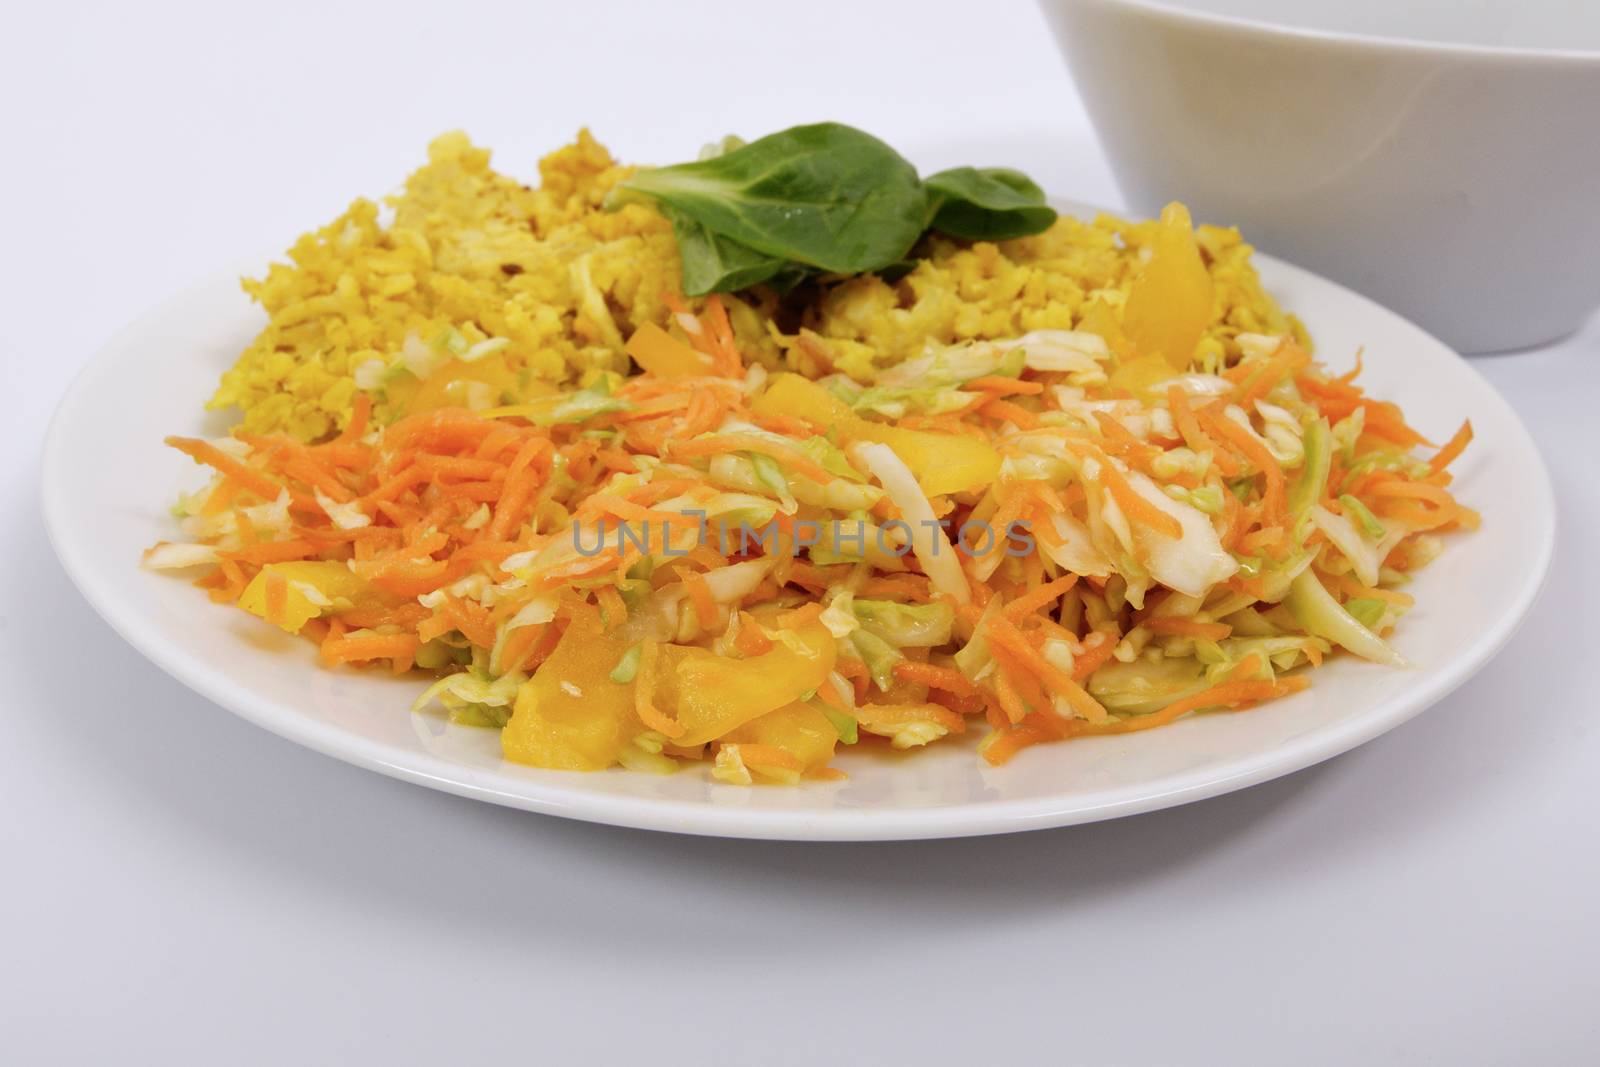 Baked Bulgar with cauliflower and vegetable salad on a white background